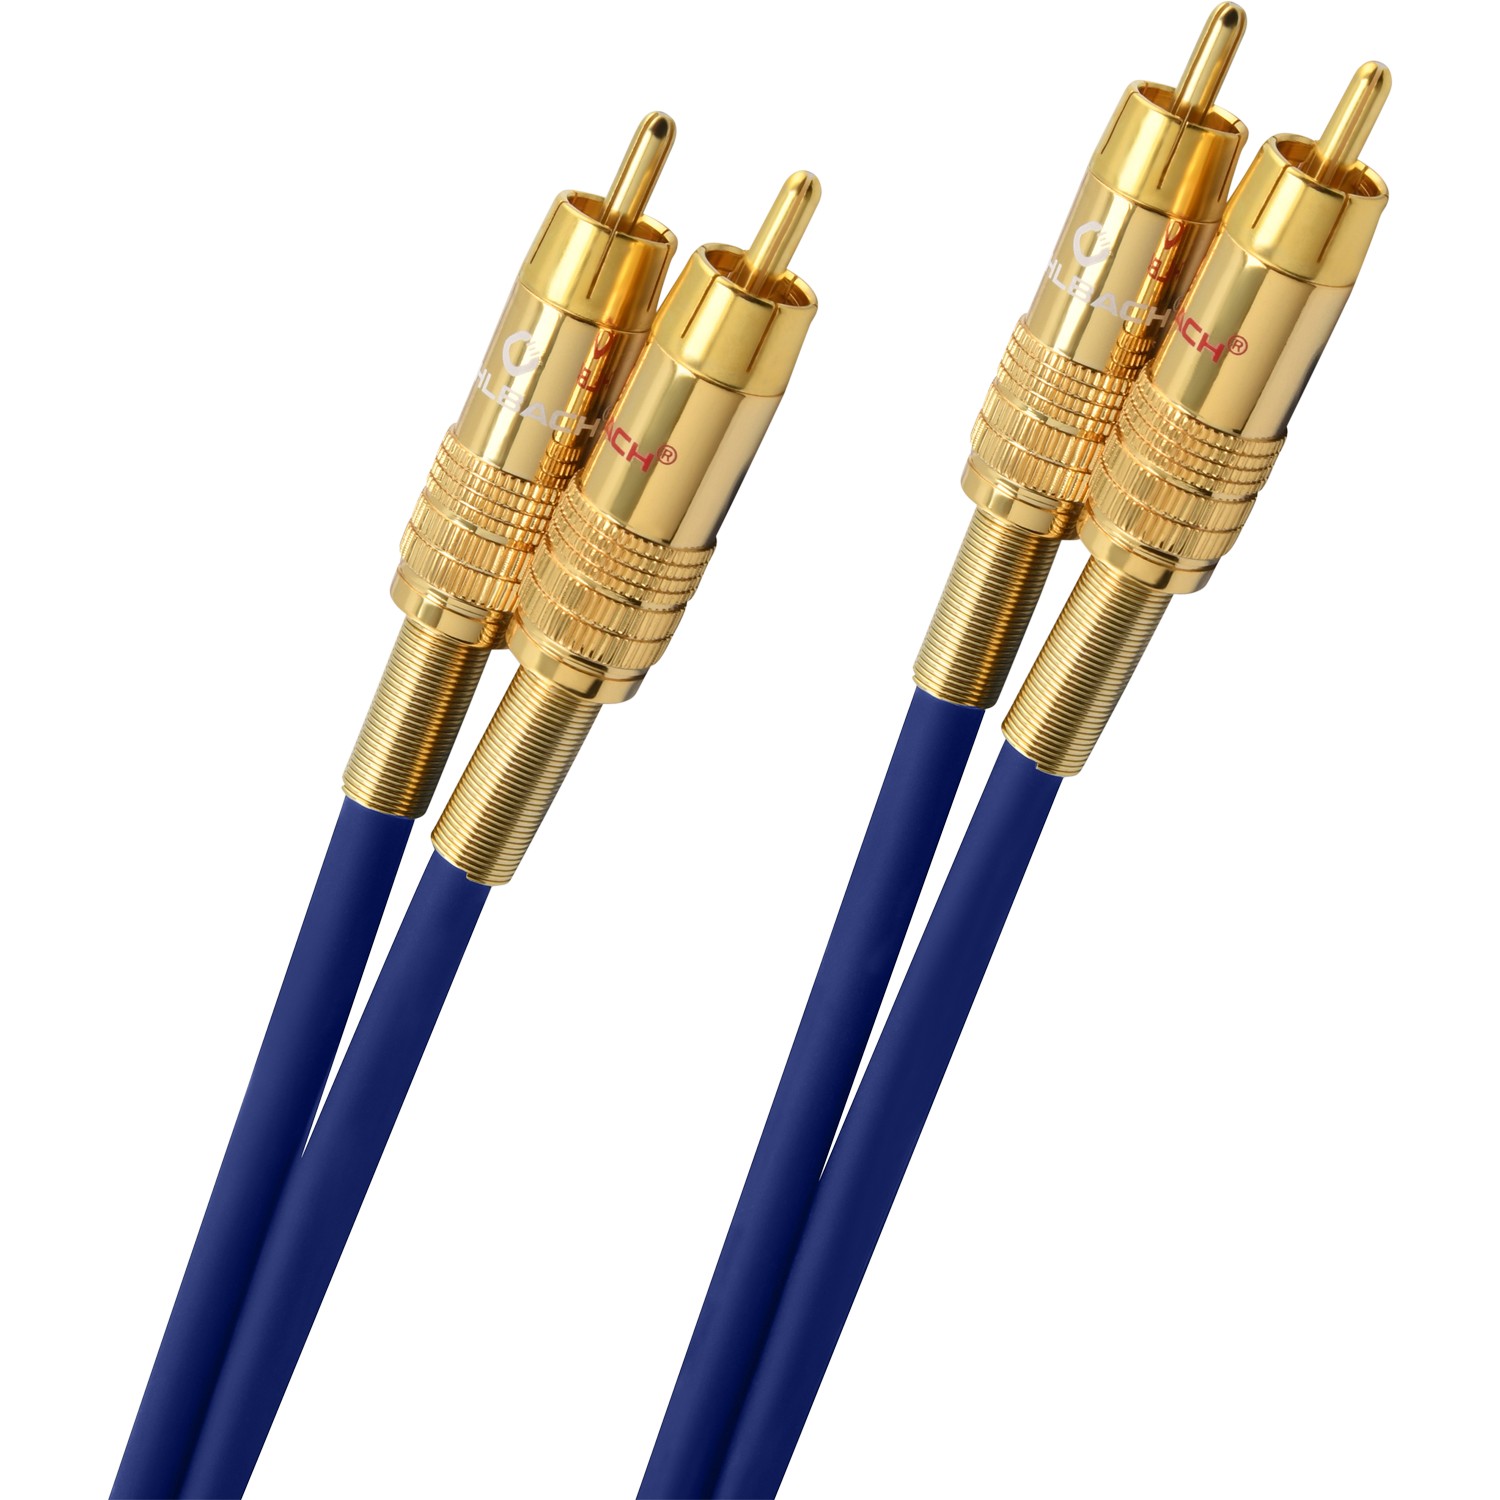 Кабели межблочные аудио Oehlbach PERFORMANCE NF 1 Master Set 1 x 10m, blue, D1C2039 кабели межблочные аудио oehlbach state of the art xxl cable xlr 2x1 50m gold d1c13134